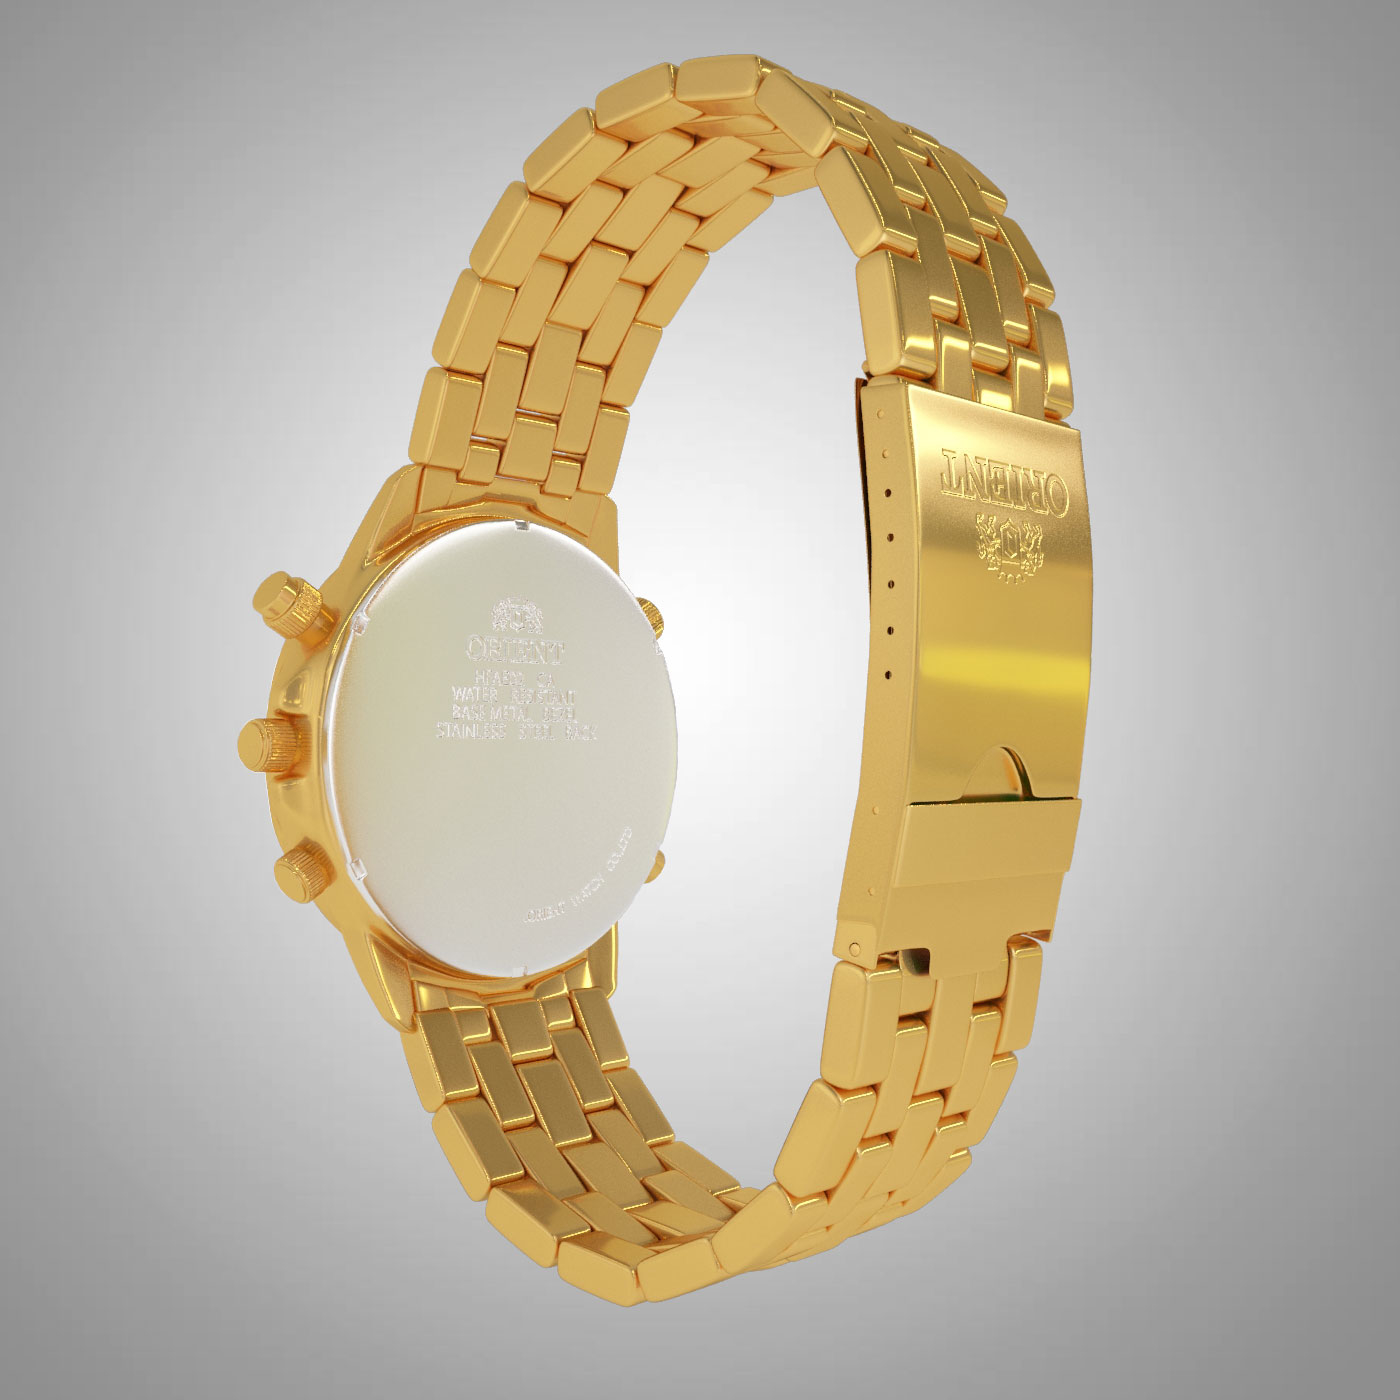 max orient gold watch chronograph